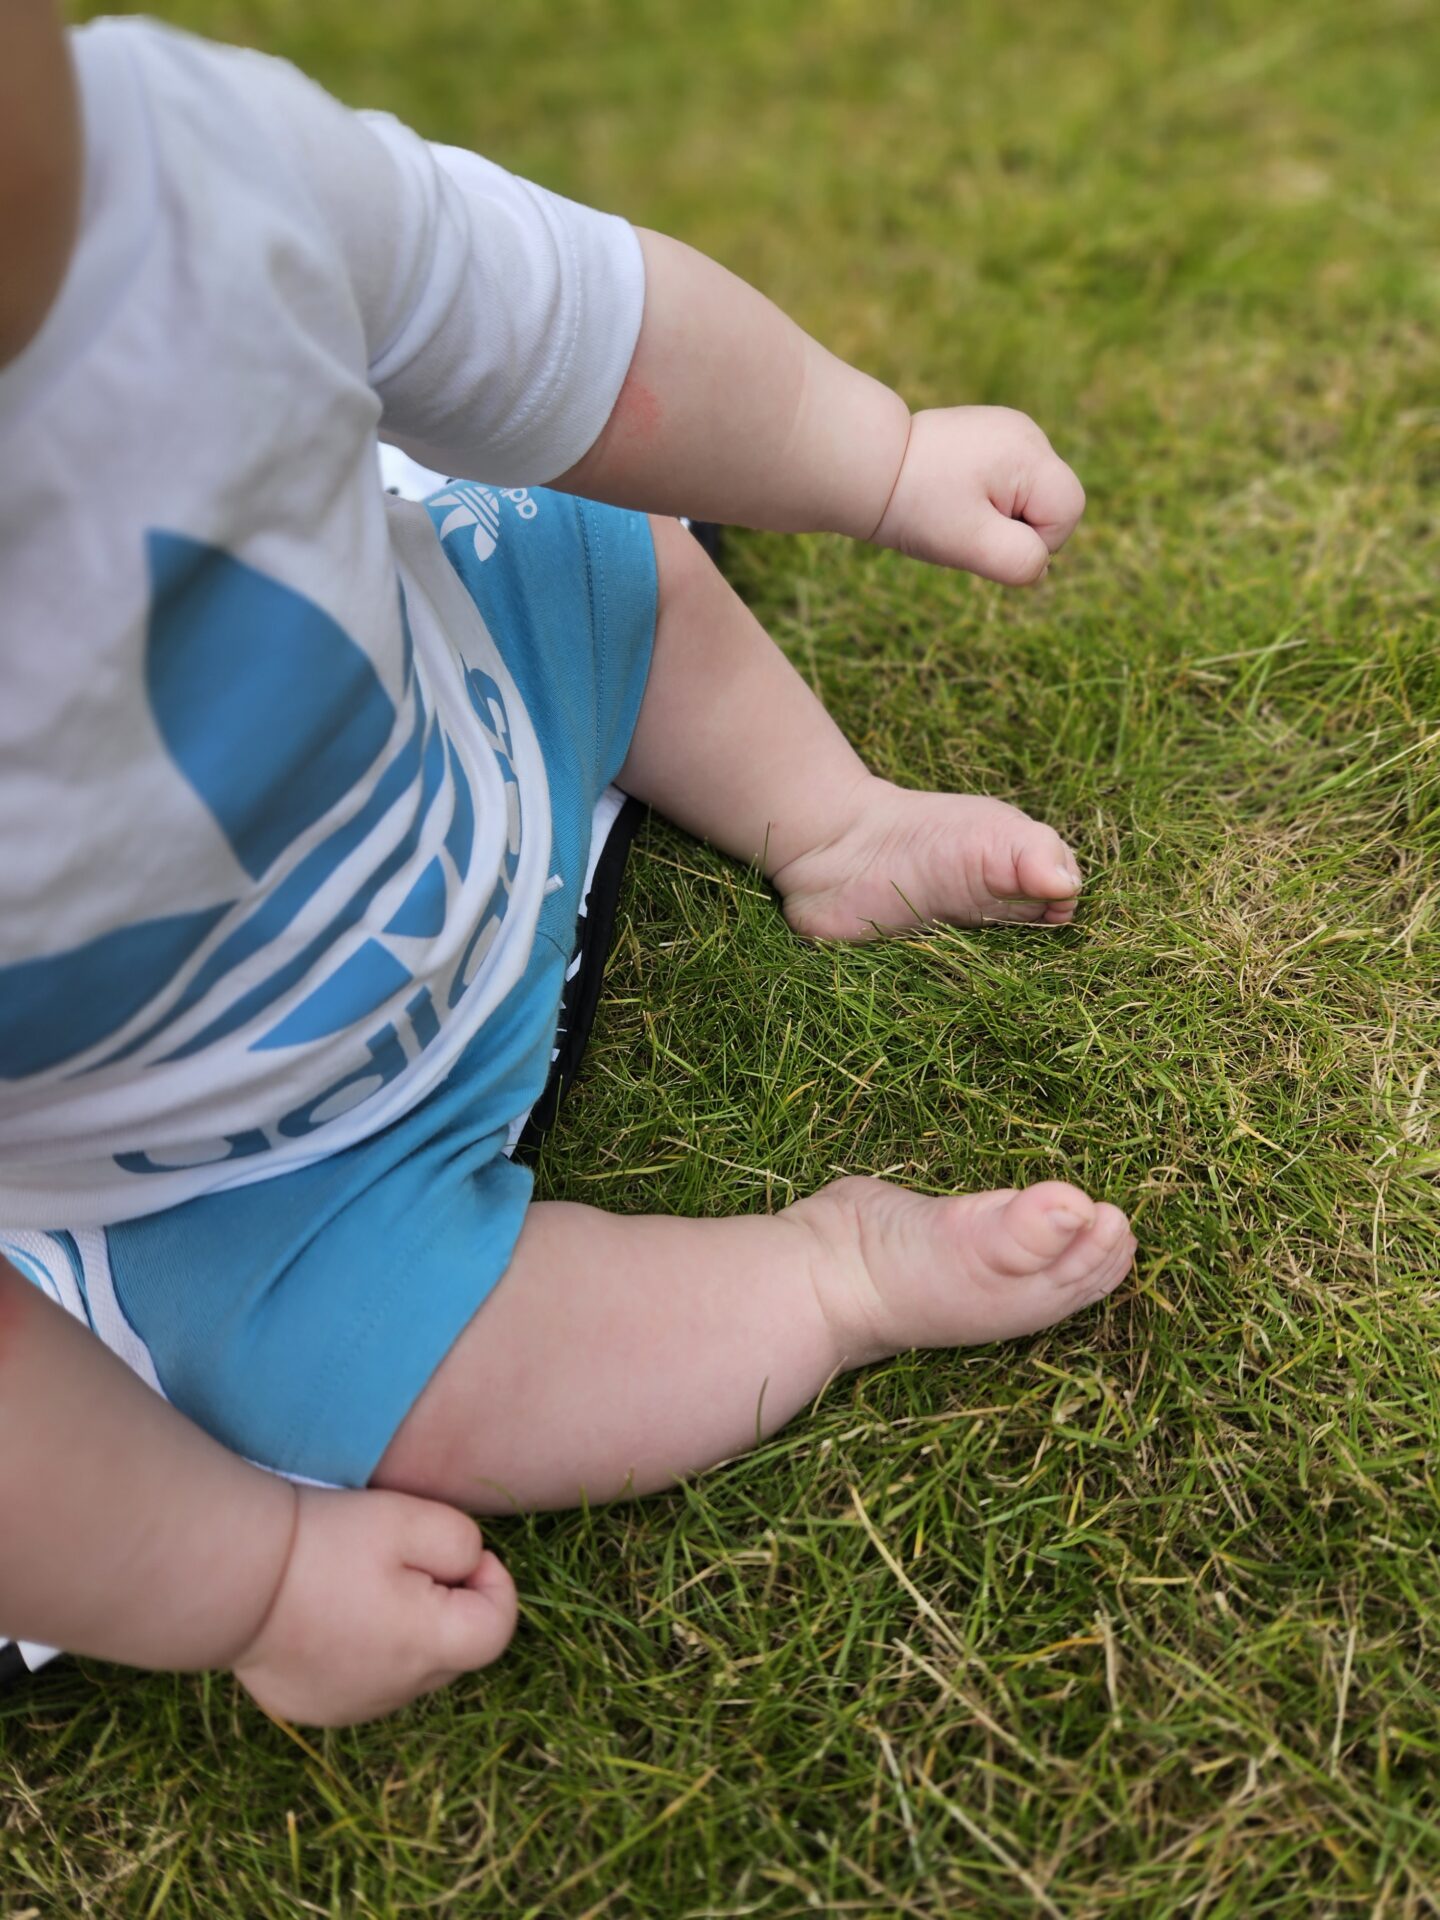 baby sitting on the green grass, just his toes and lower body are visible